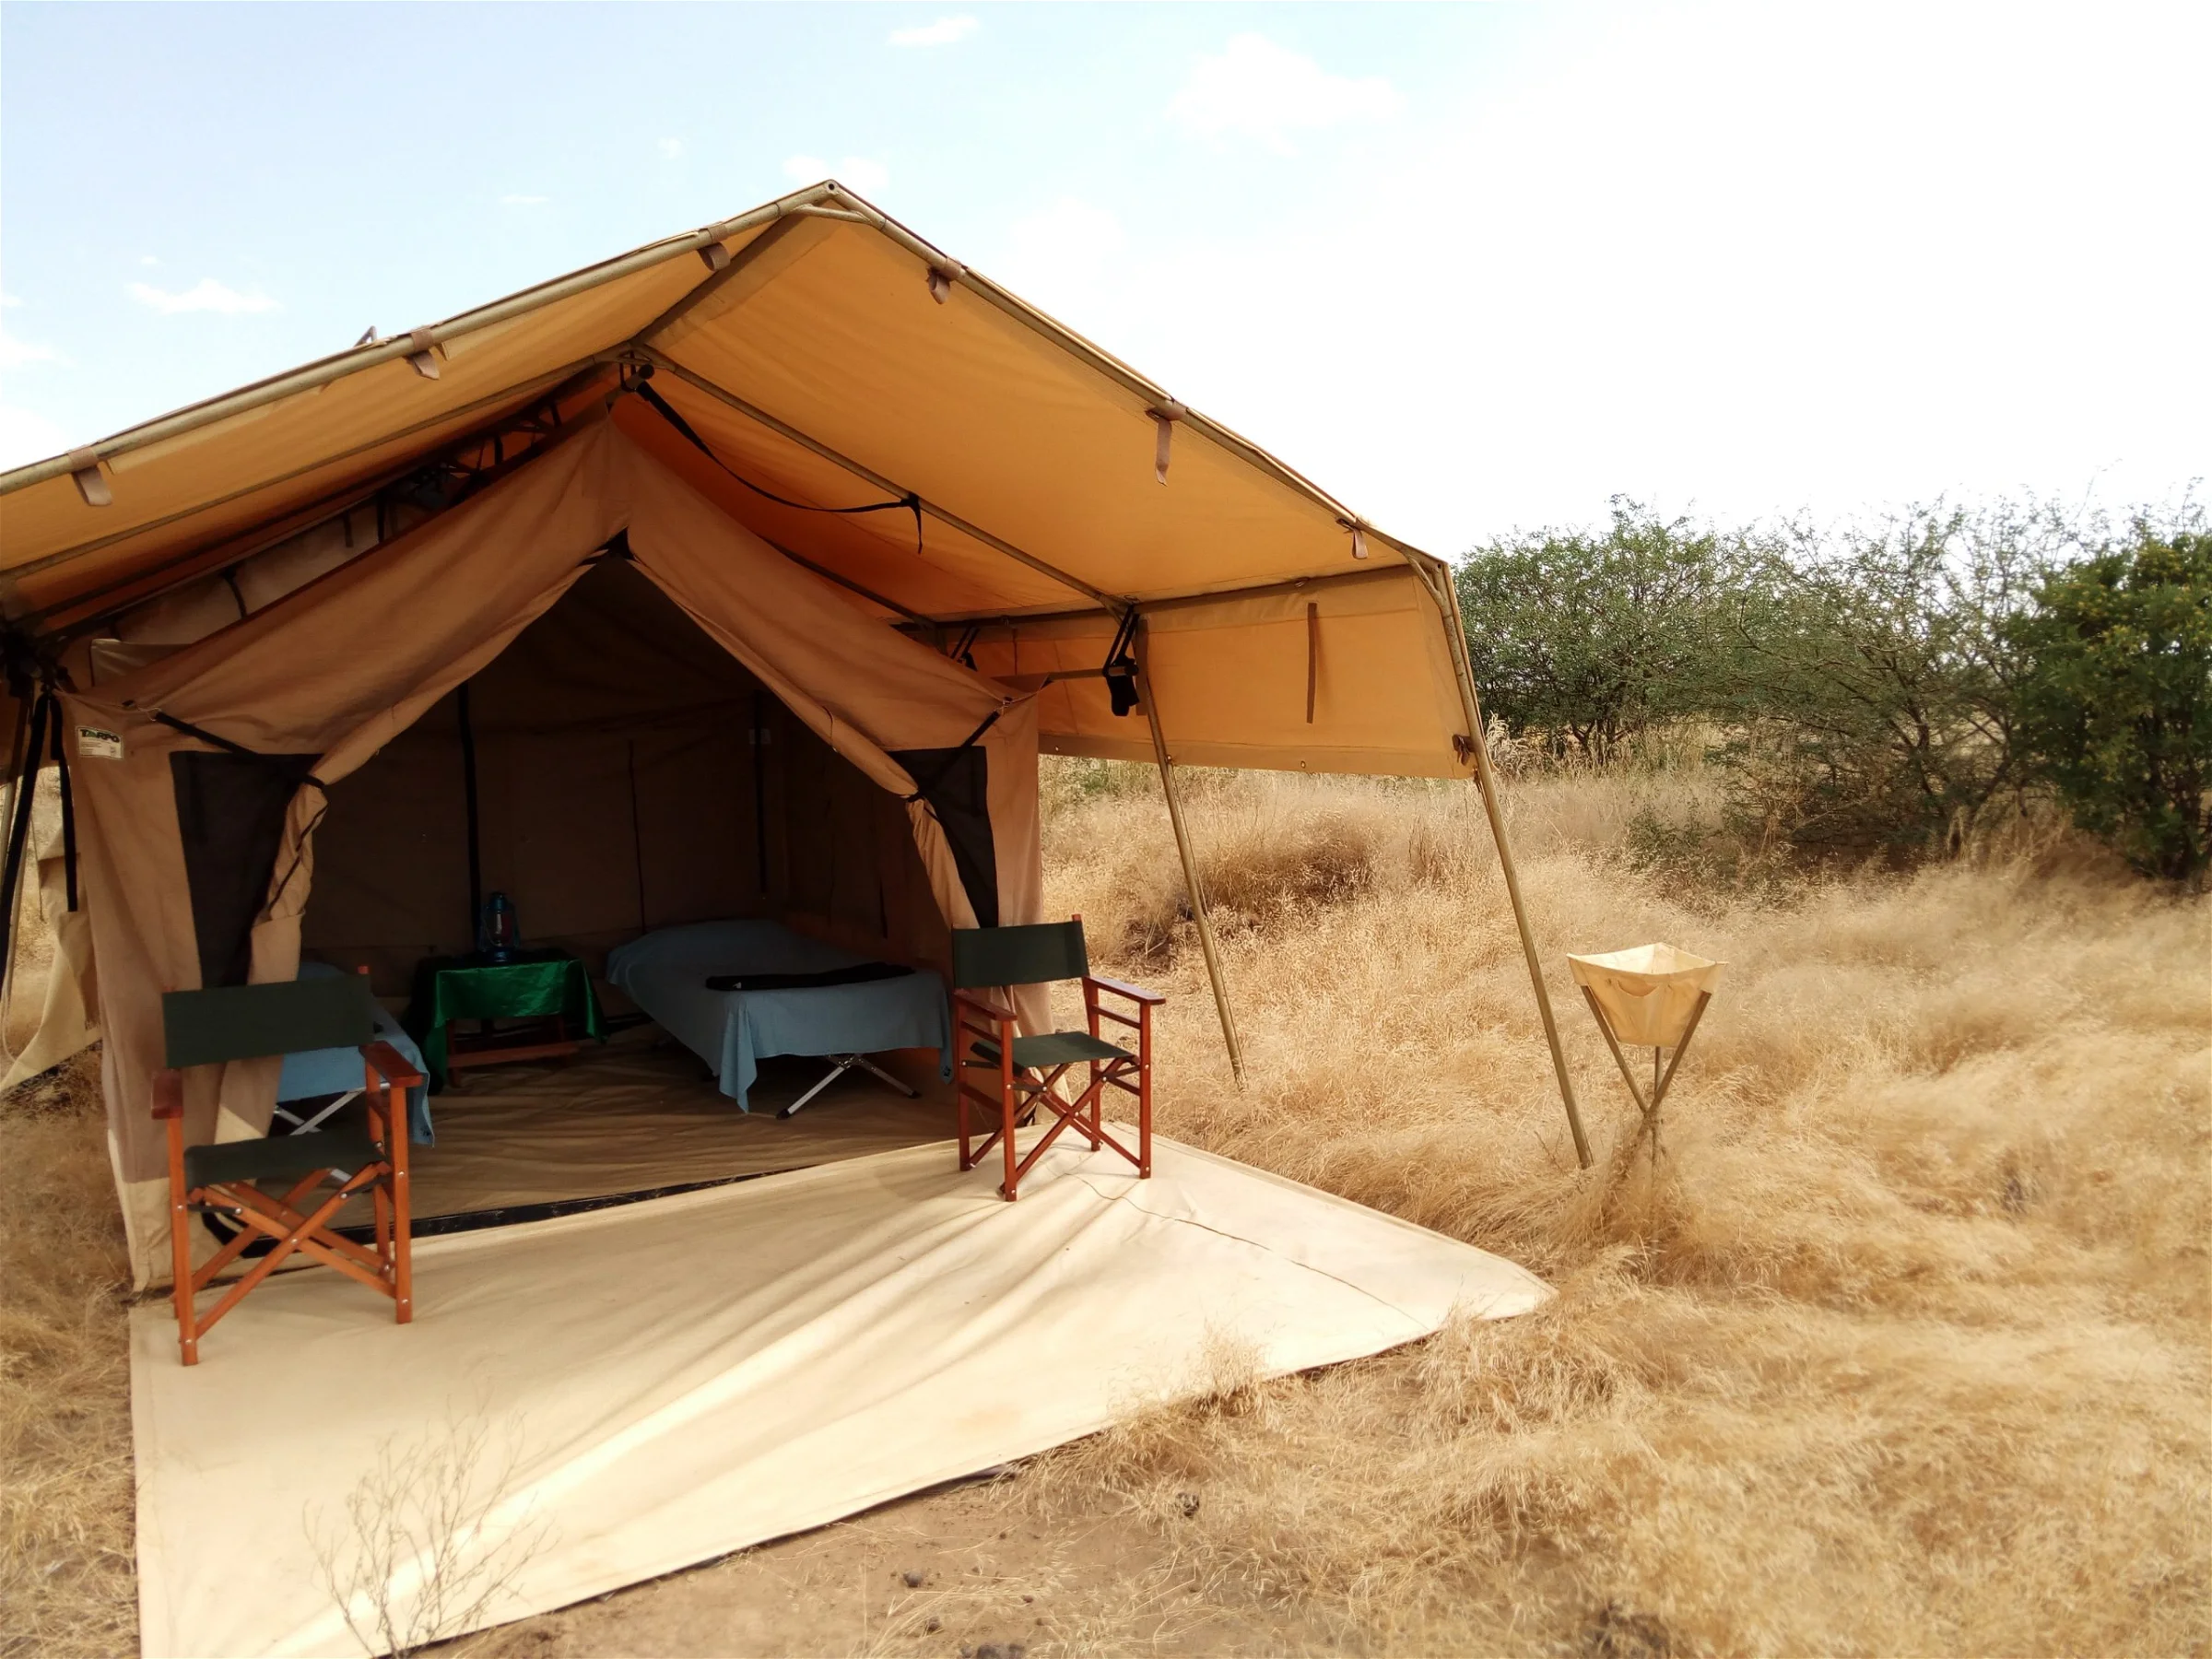 Ensuite tent for a luxurious camping experience.